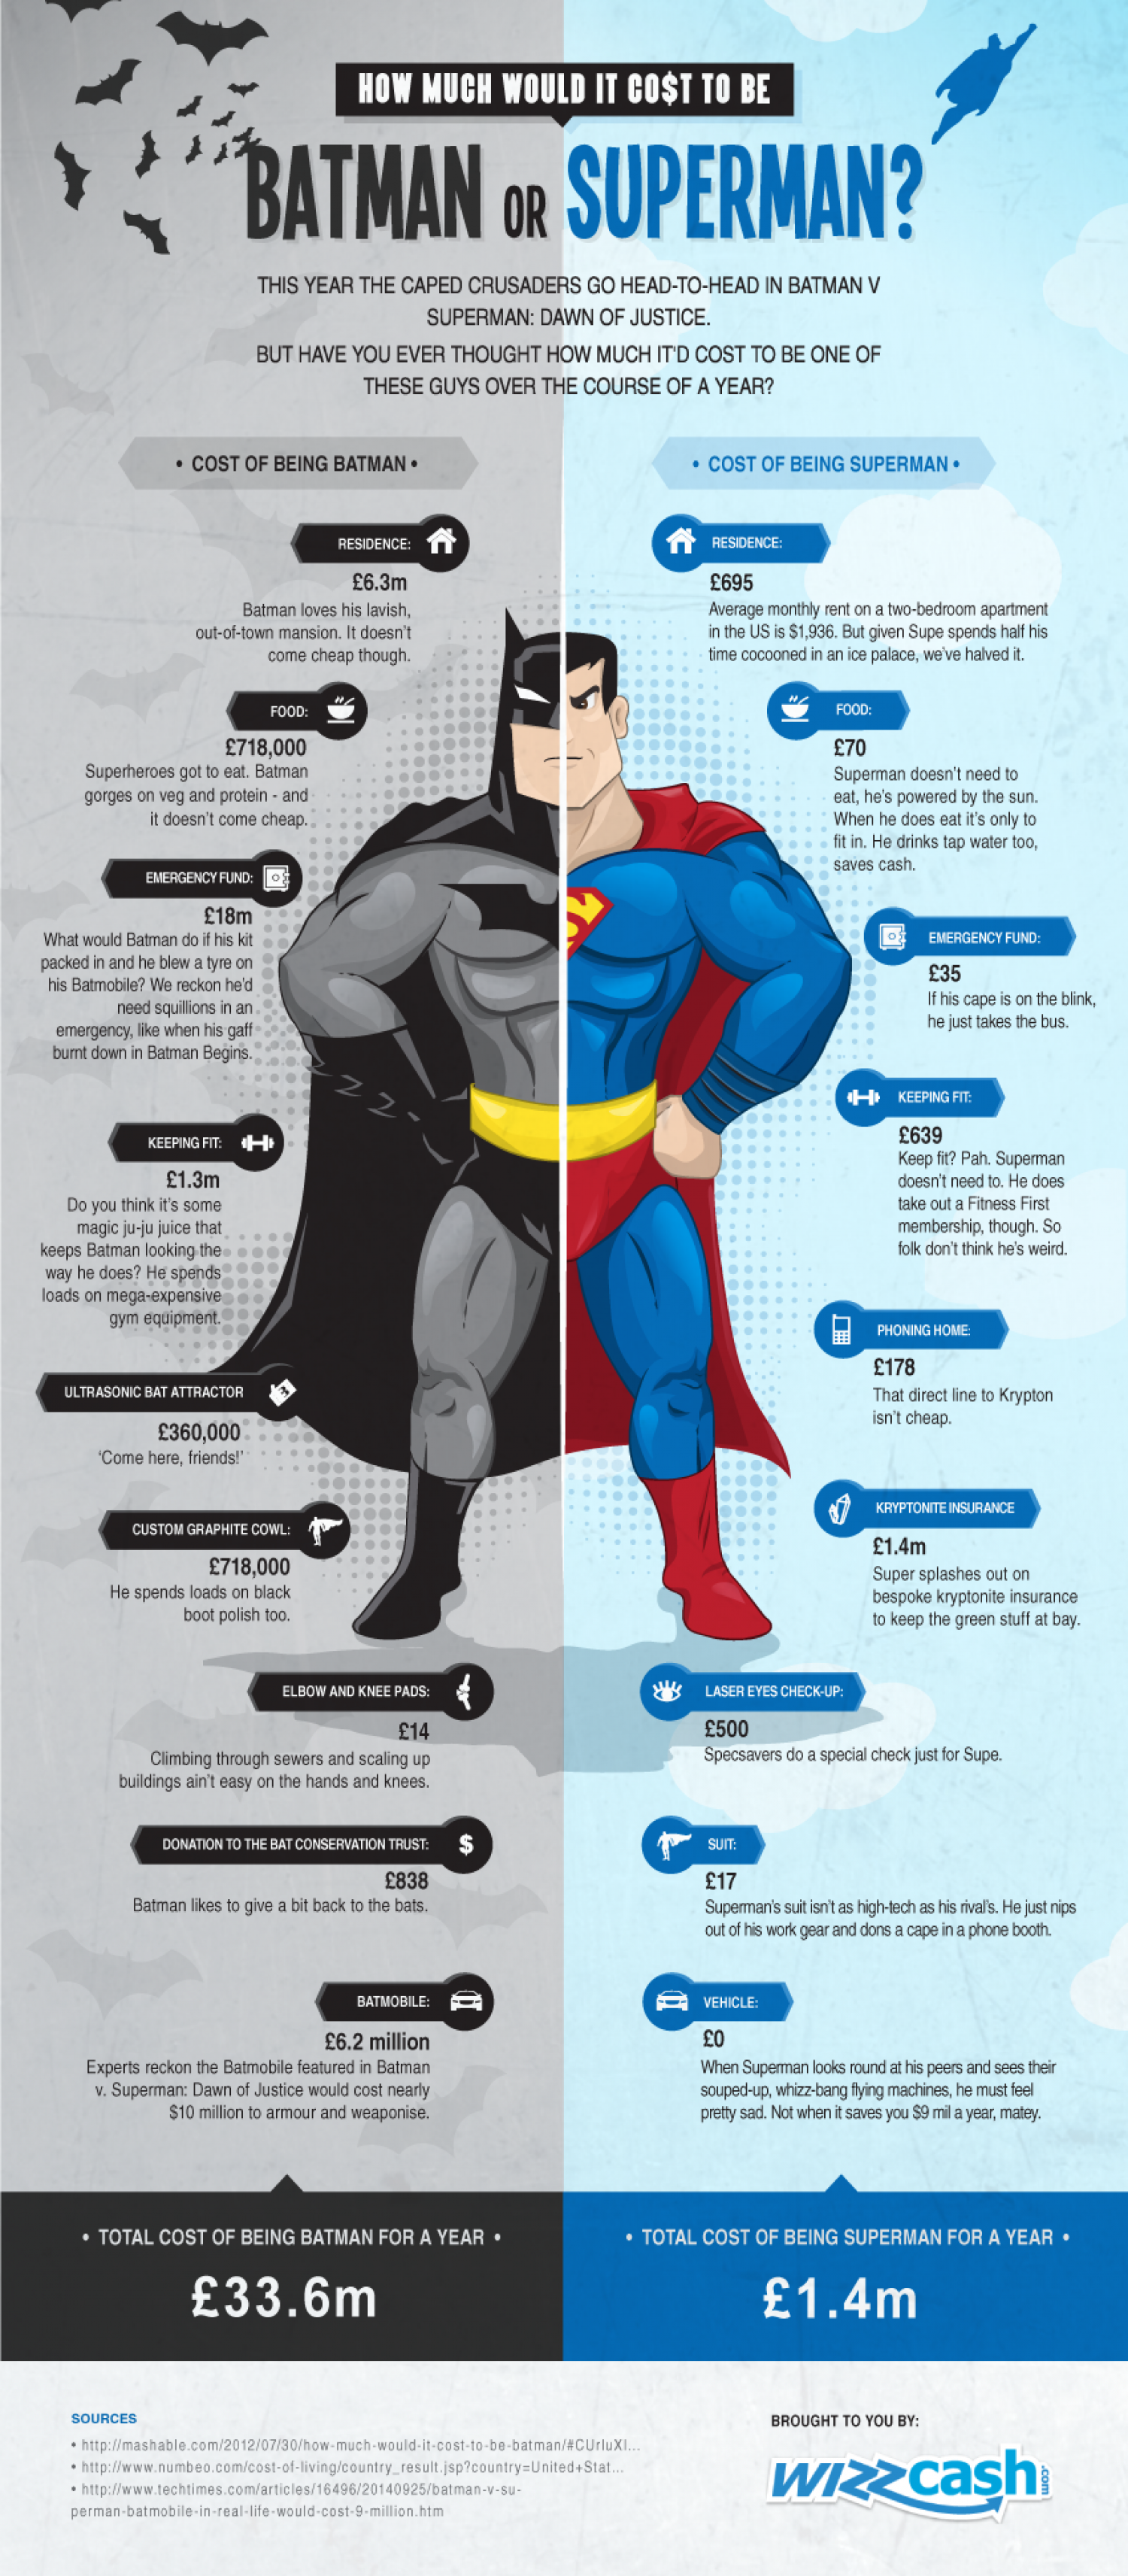 How Much Would It Cost To Be Batman or Superman? Infographic